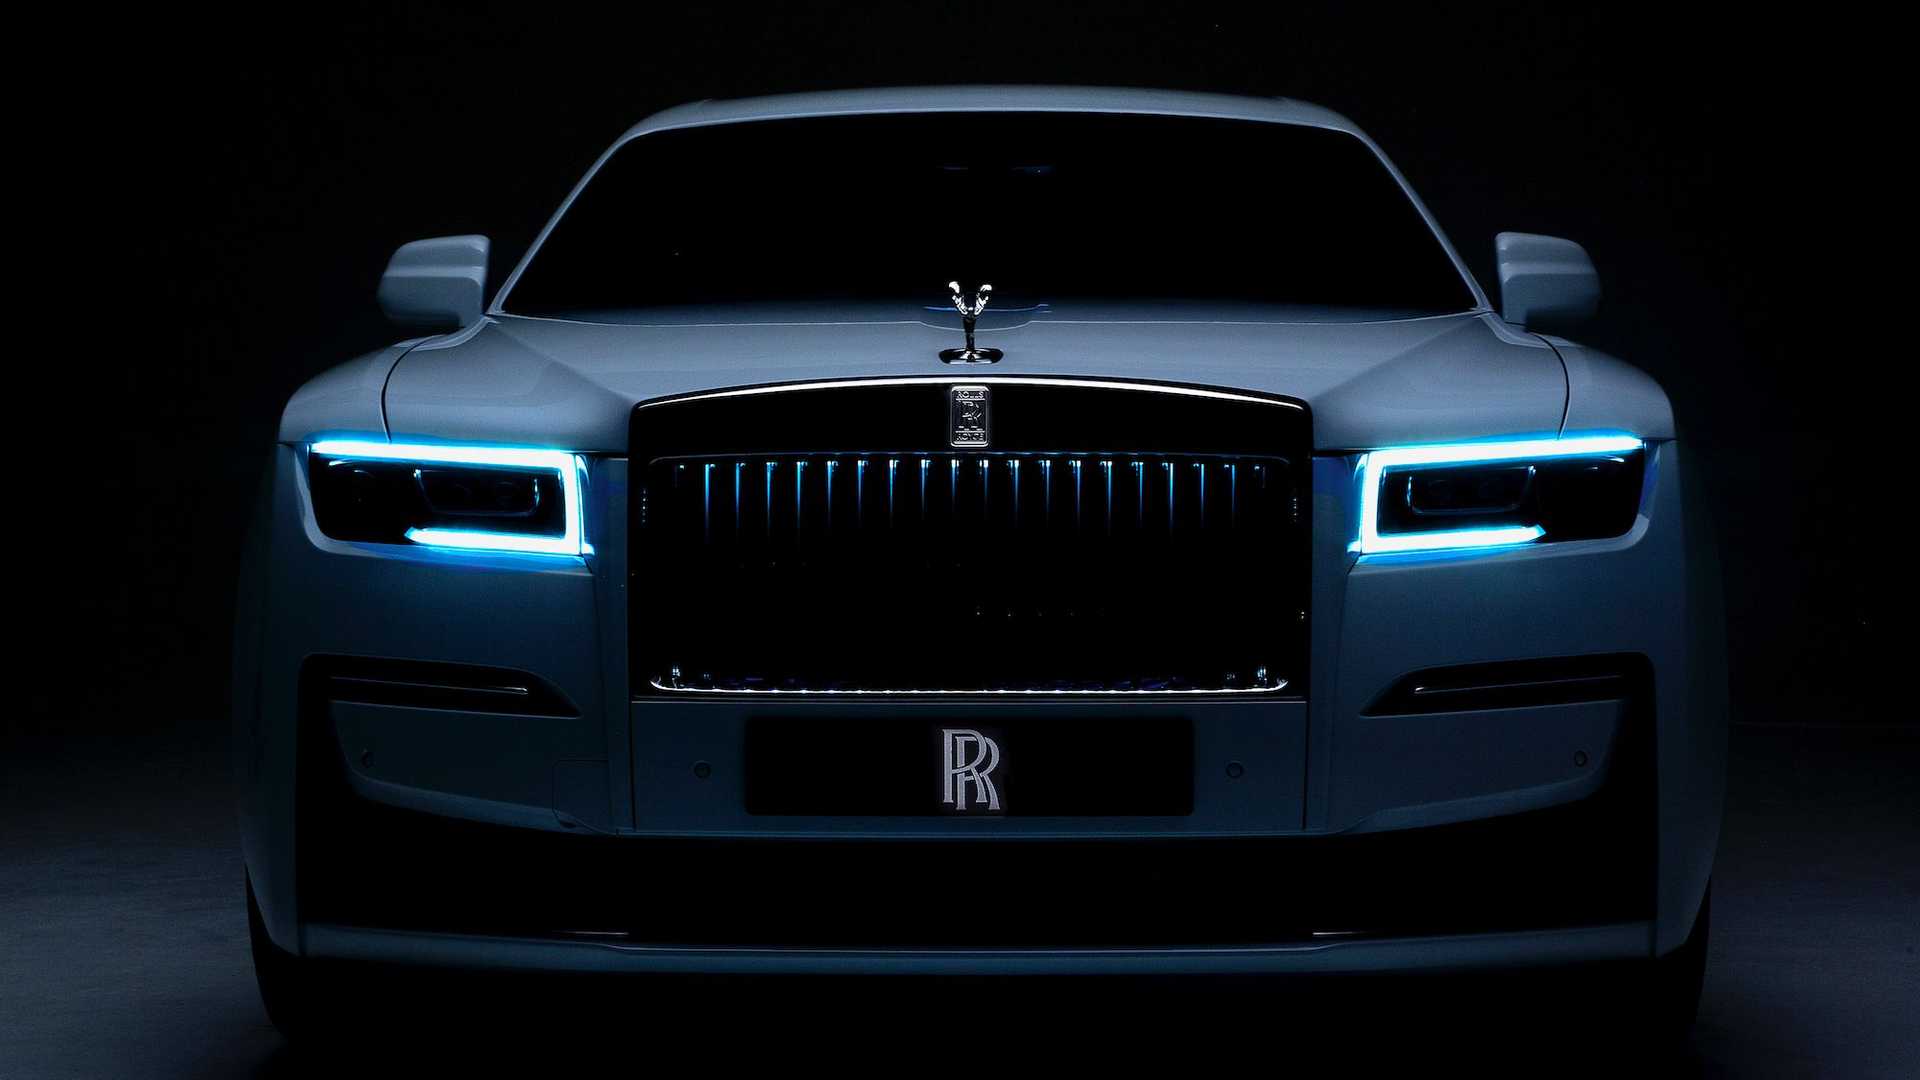 The Rolls-Royce Ghost has the quietest luxury cabin in the business